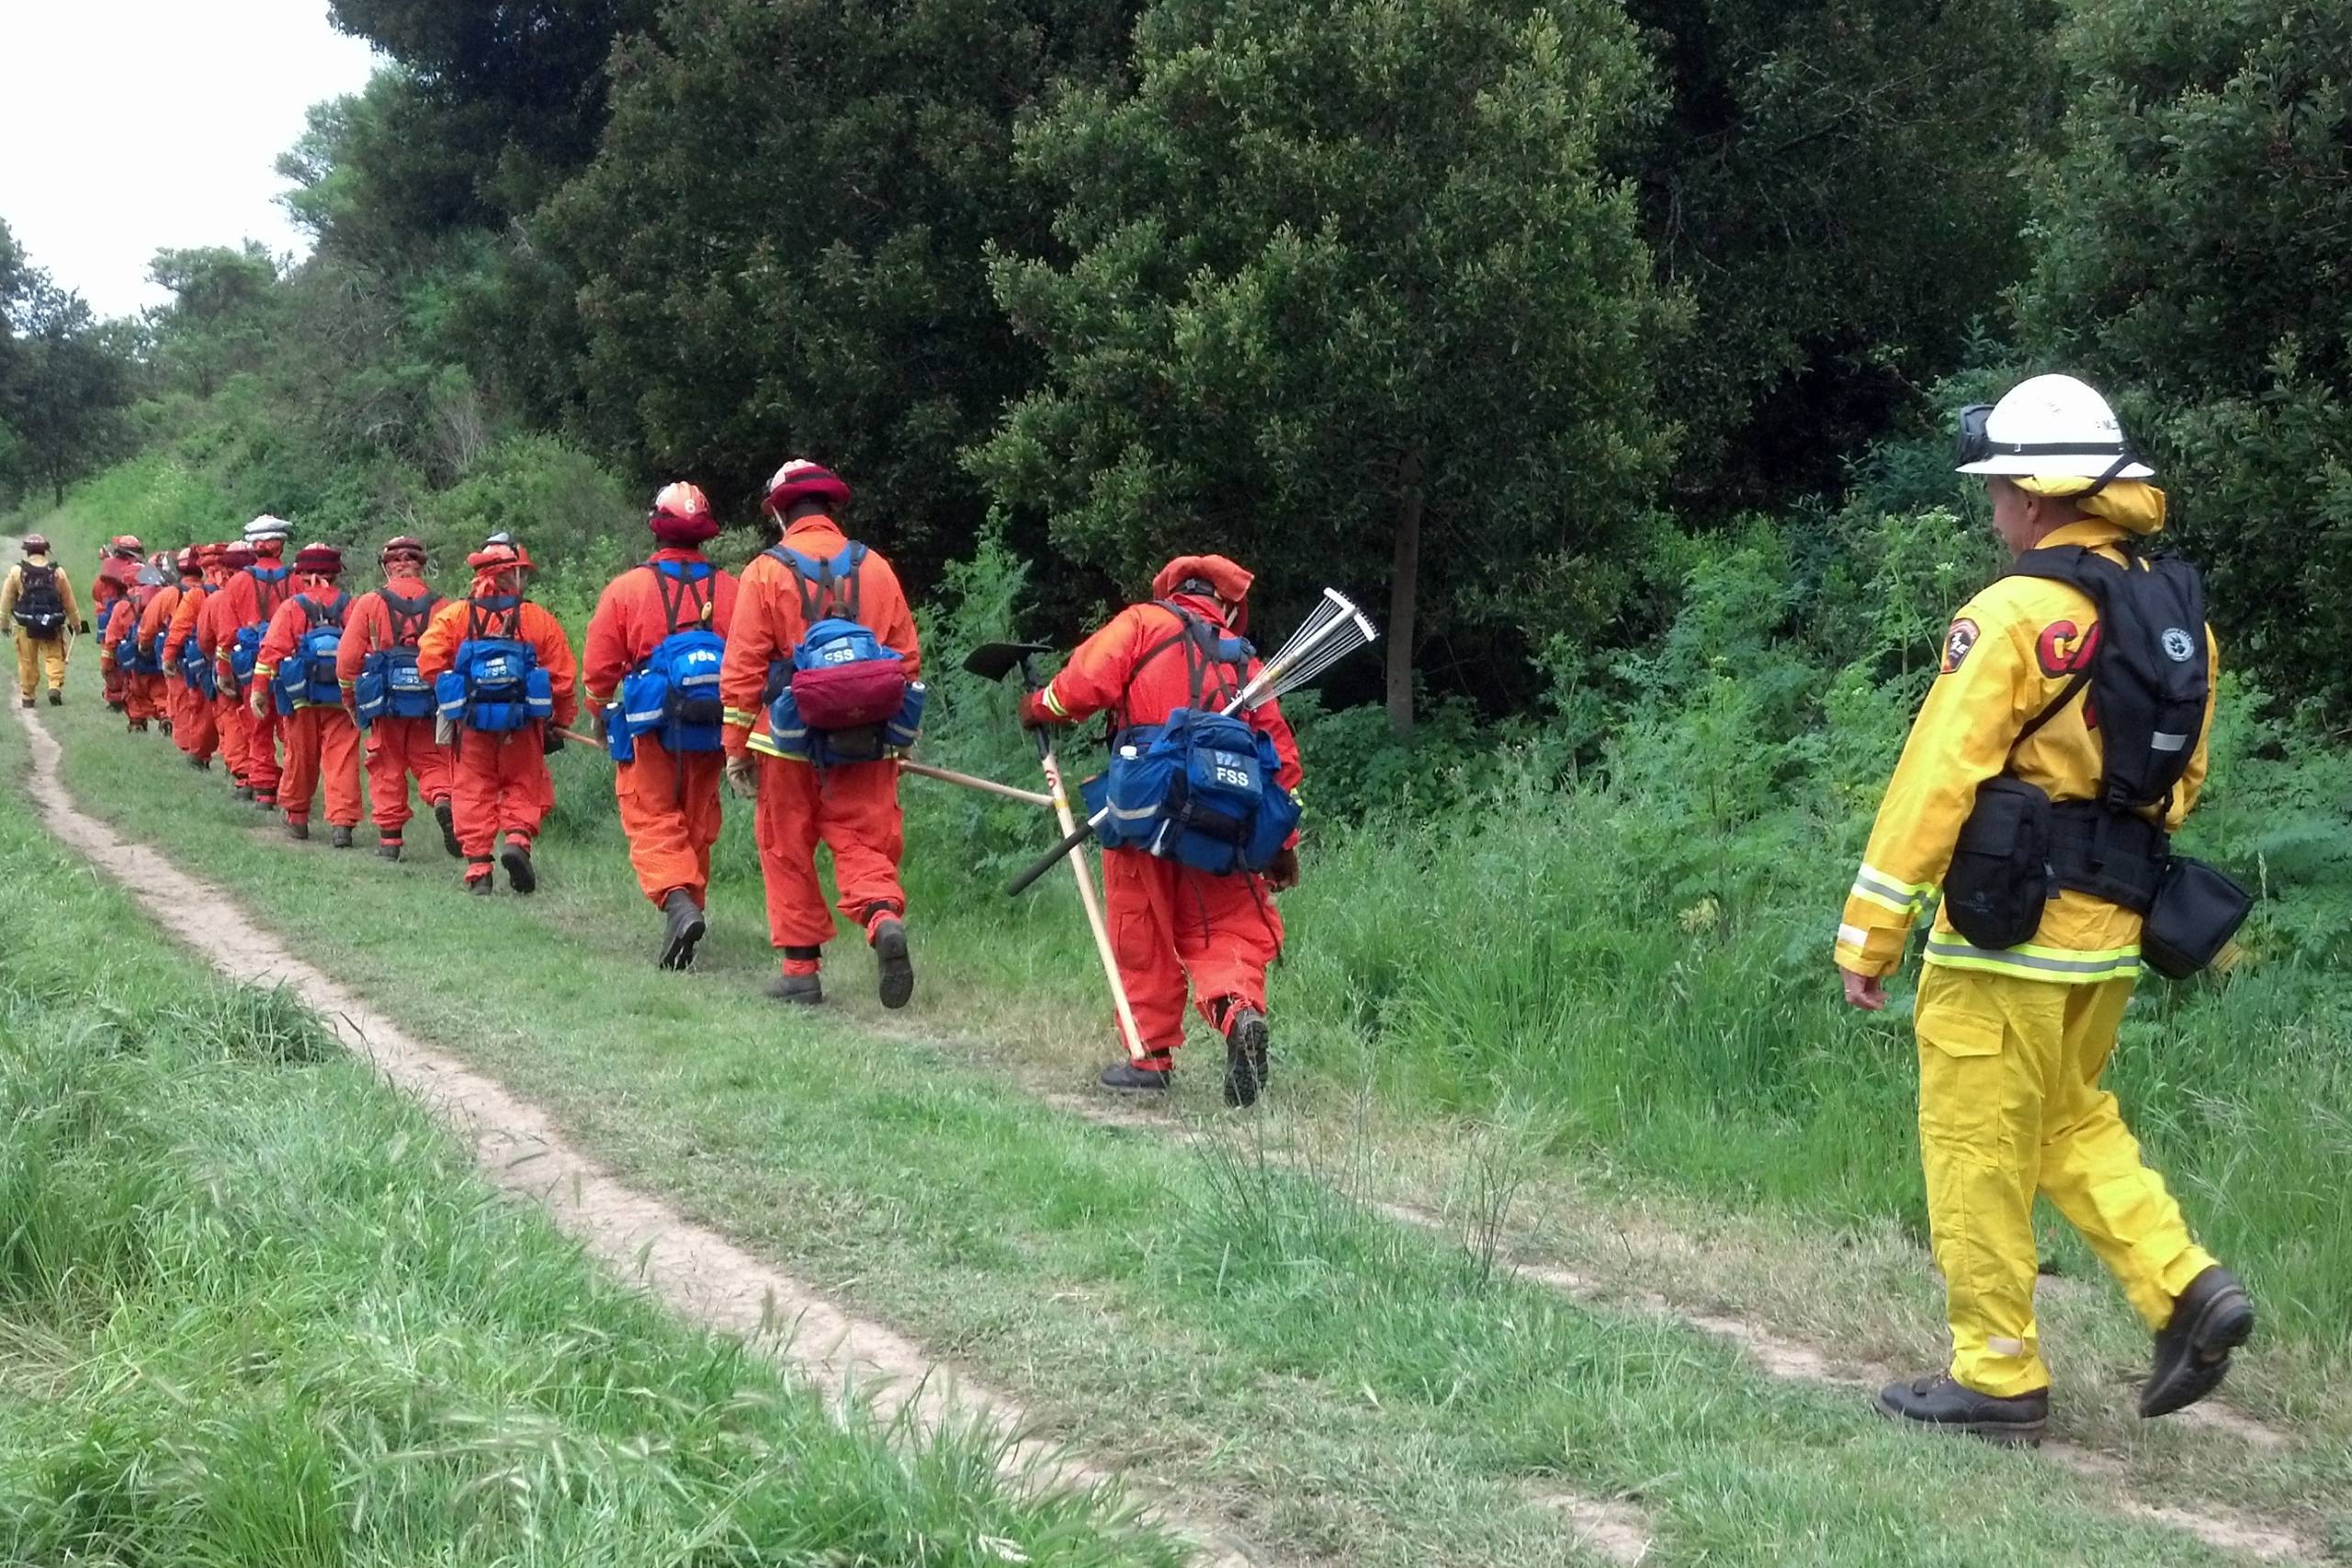 A line of firefighters wearing bright orange uniforms and carrying equipment walk alongside a forest in front of a firefighter wearing a traditional yellow uniform.